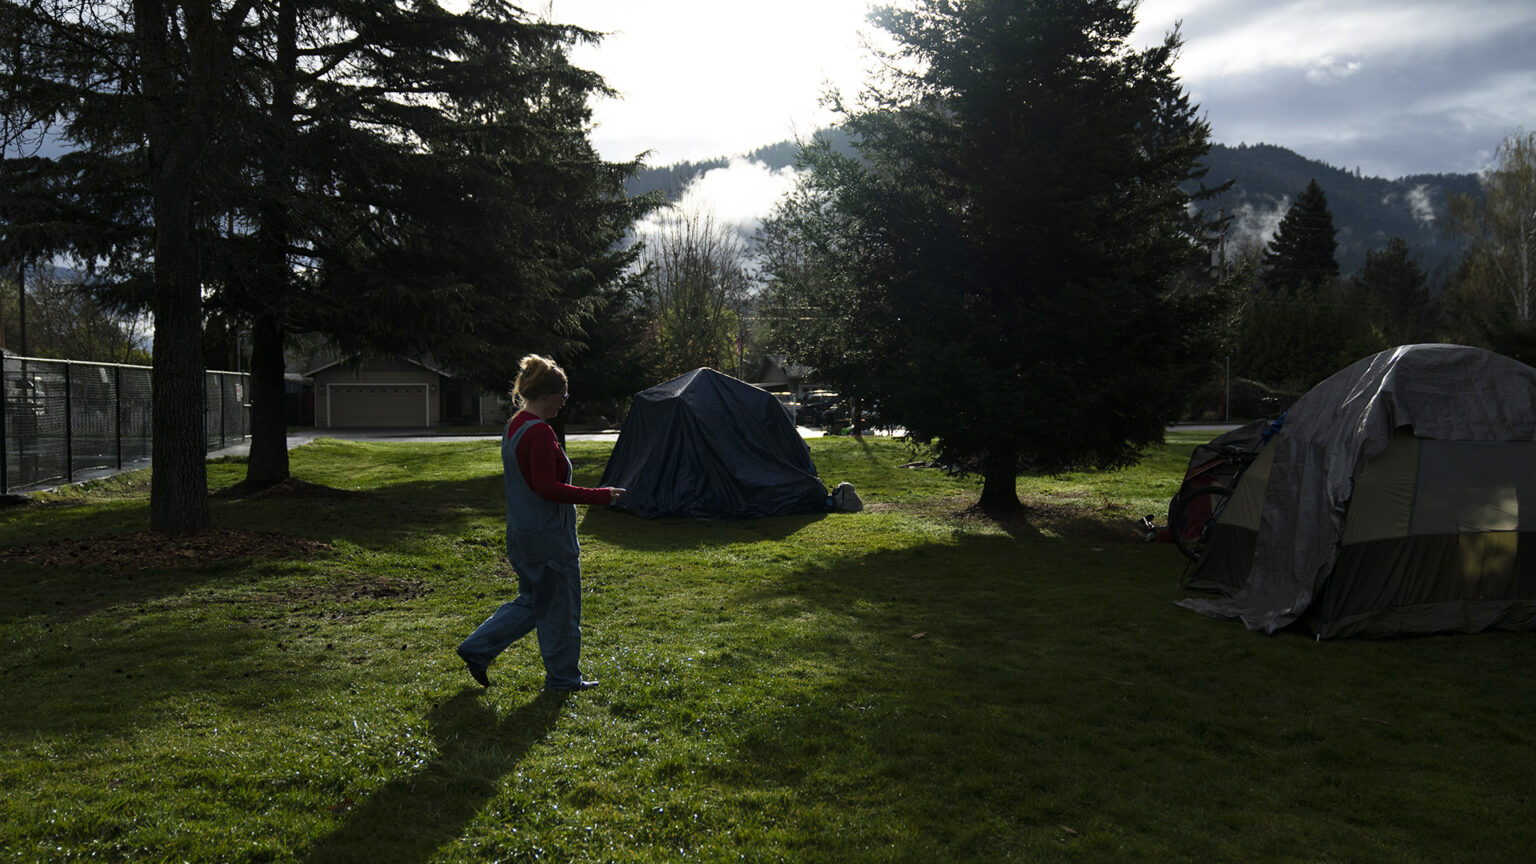 Cassy Leach walks along a lawn with multiple domed camping tents pitched among several trees, with a fence, garage and trees in the background and sun shining through low clouds along a tree-covered range.